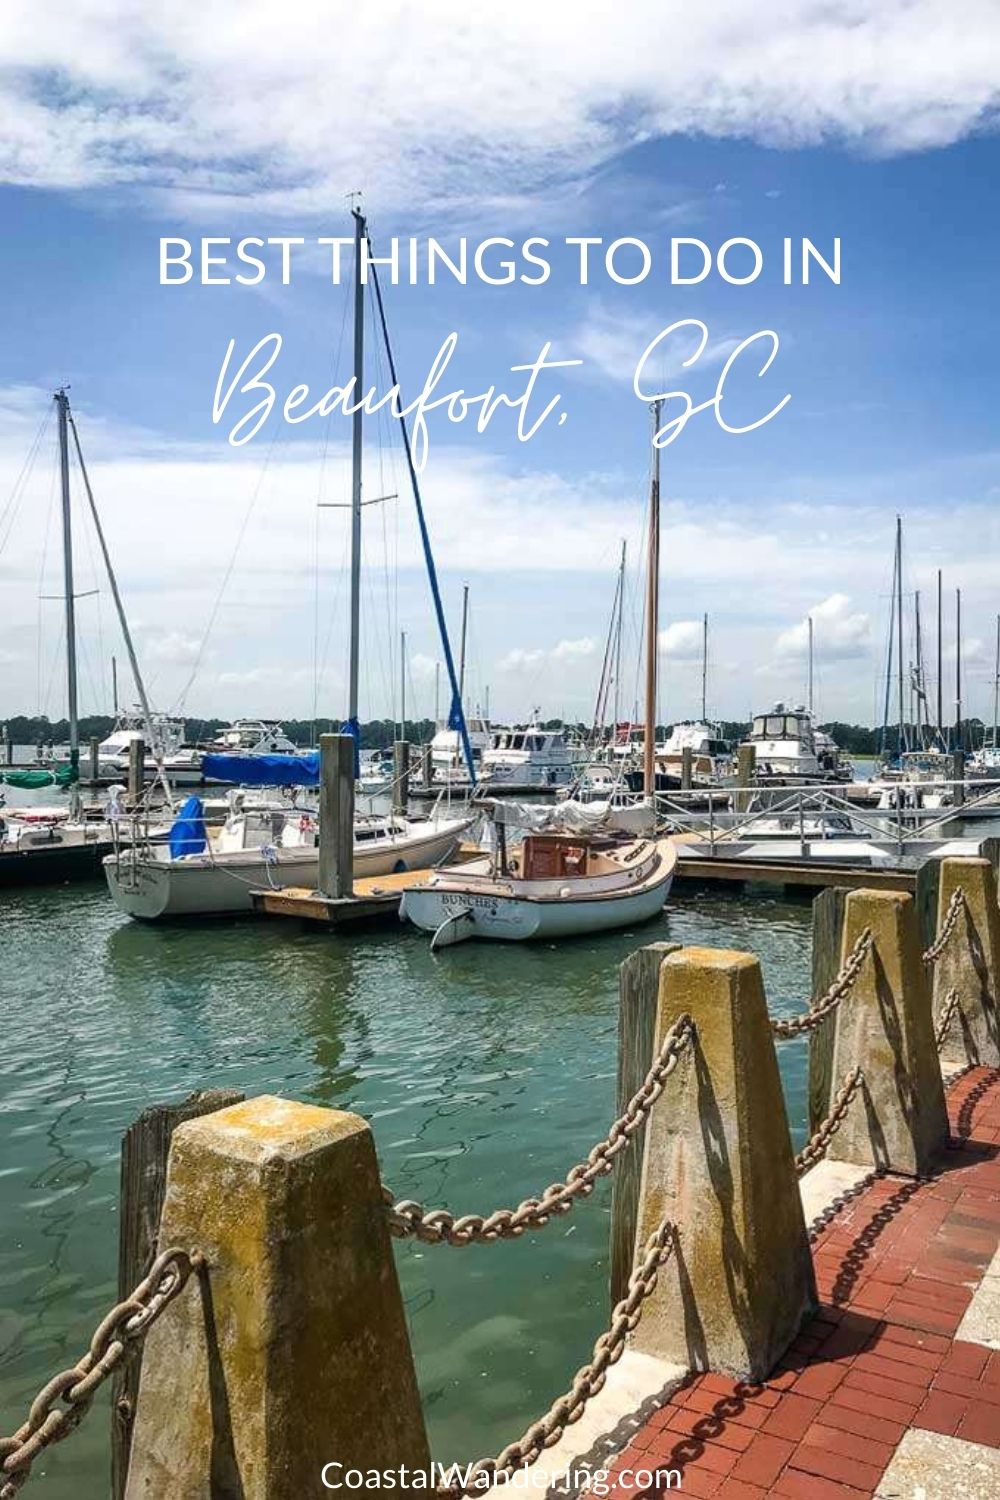 Best things to do Beaufort, SC